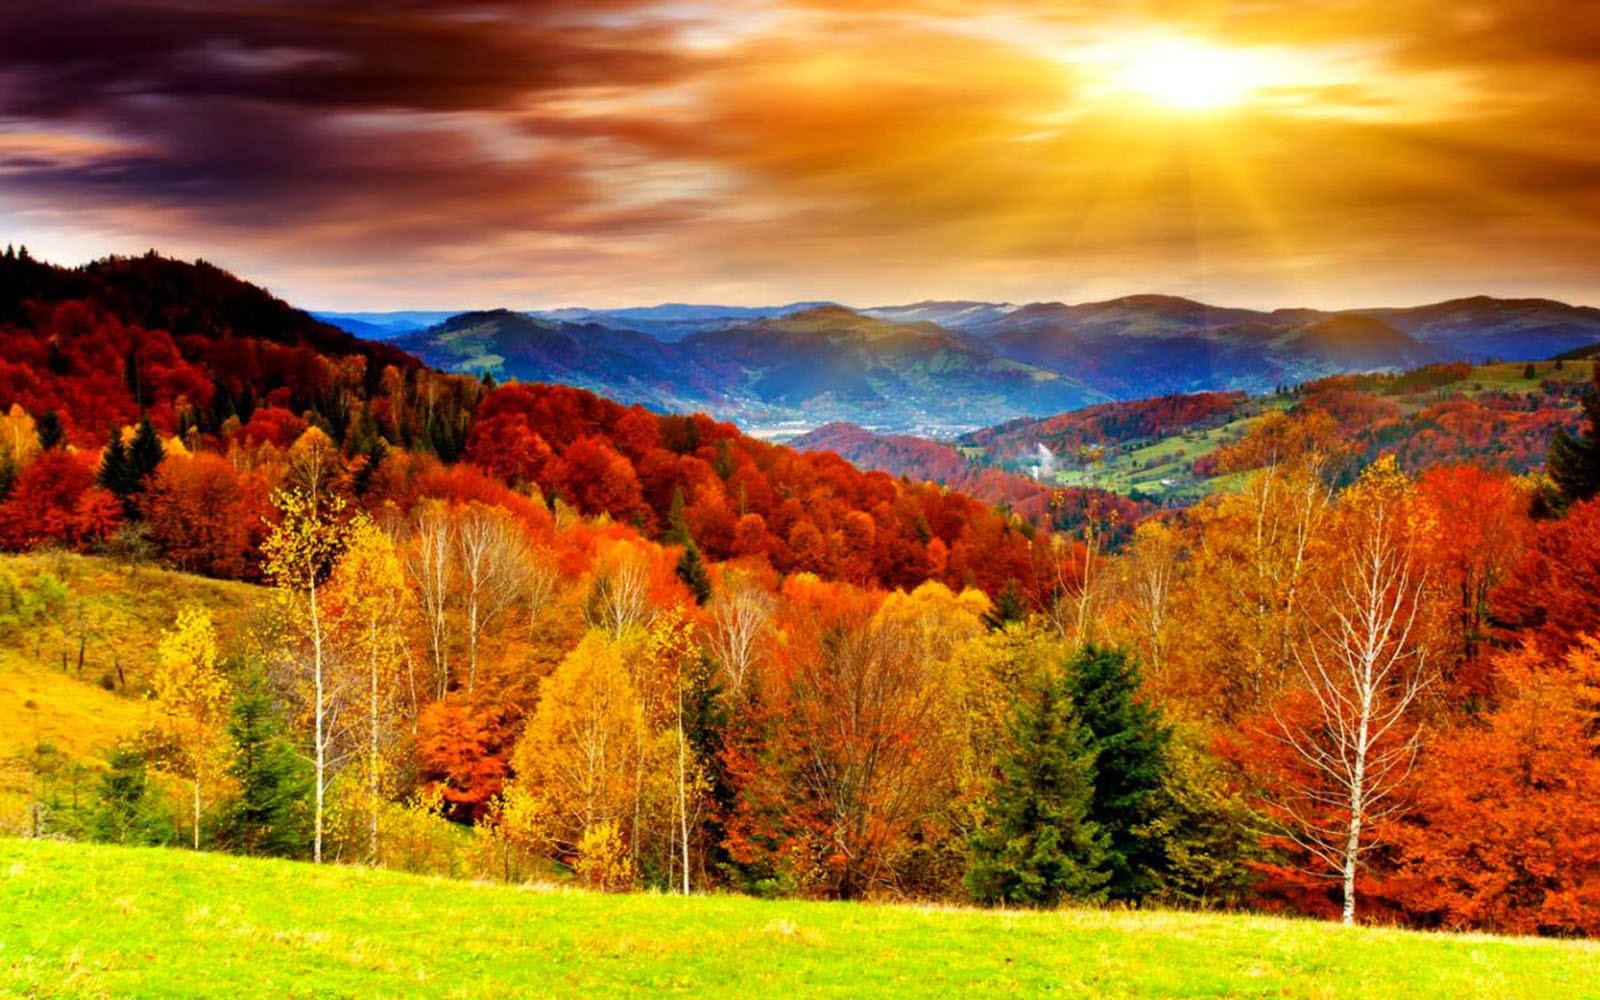 Tag Autumn Scenery Wallpapers Backgrounds Photos Images and